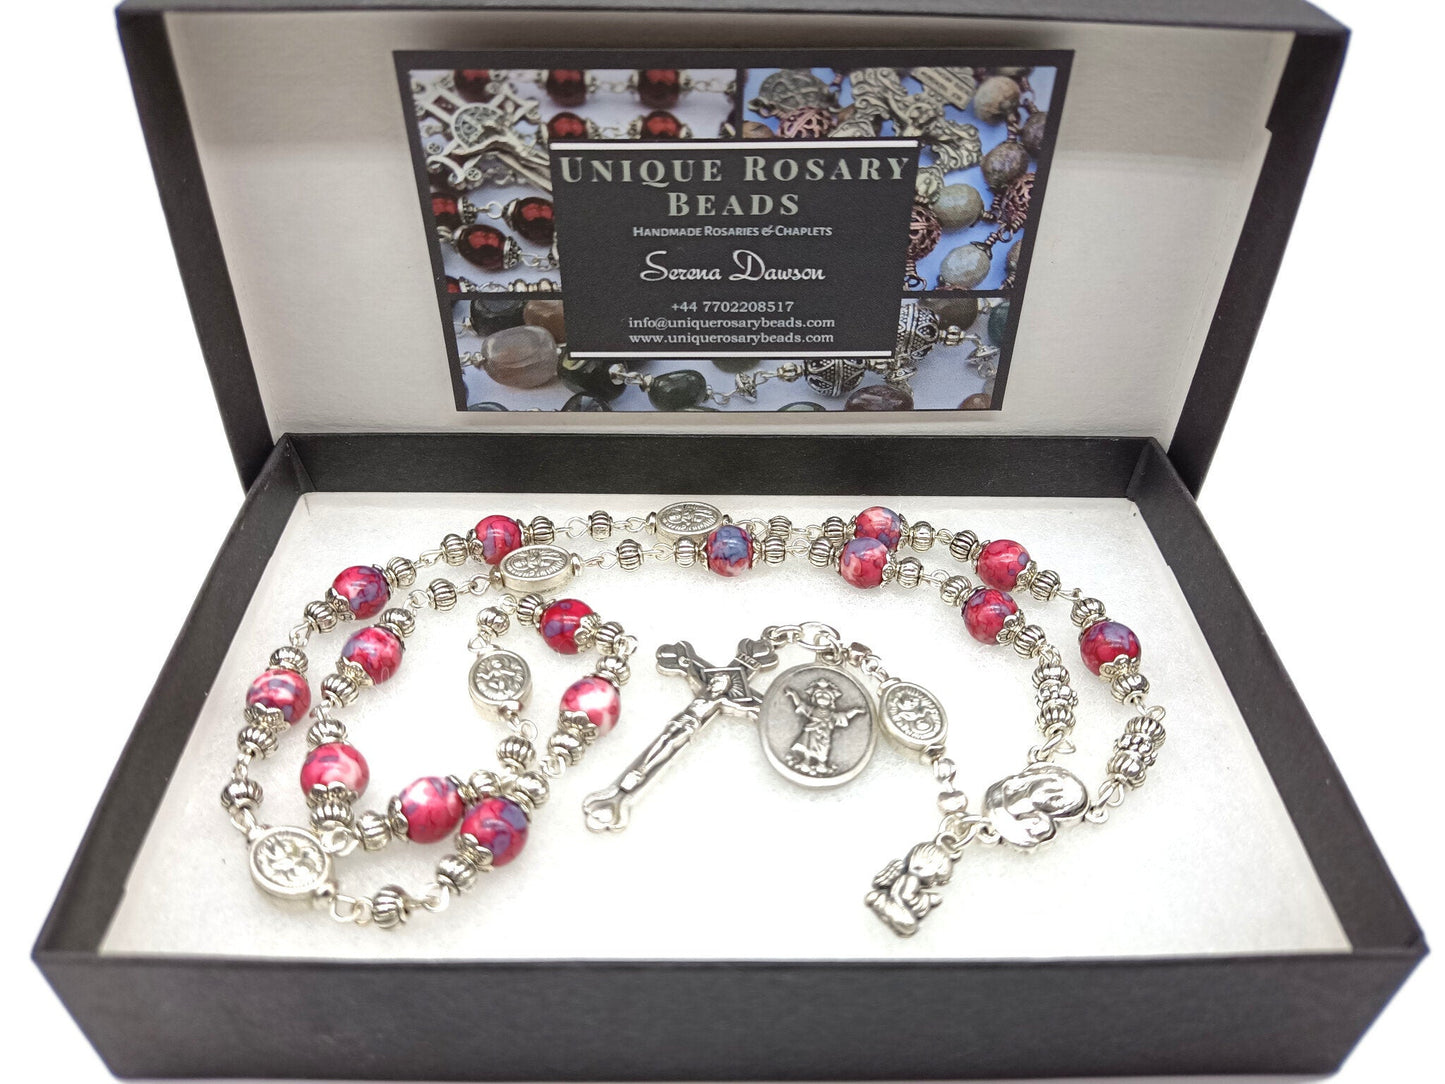 Gemstone Divino Nino unique rosary beads chaplet for the unborn with silver guardian angel medals.